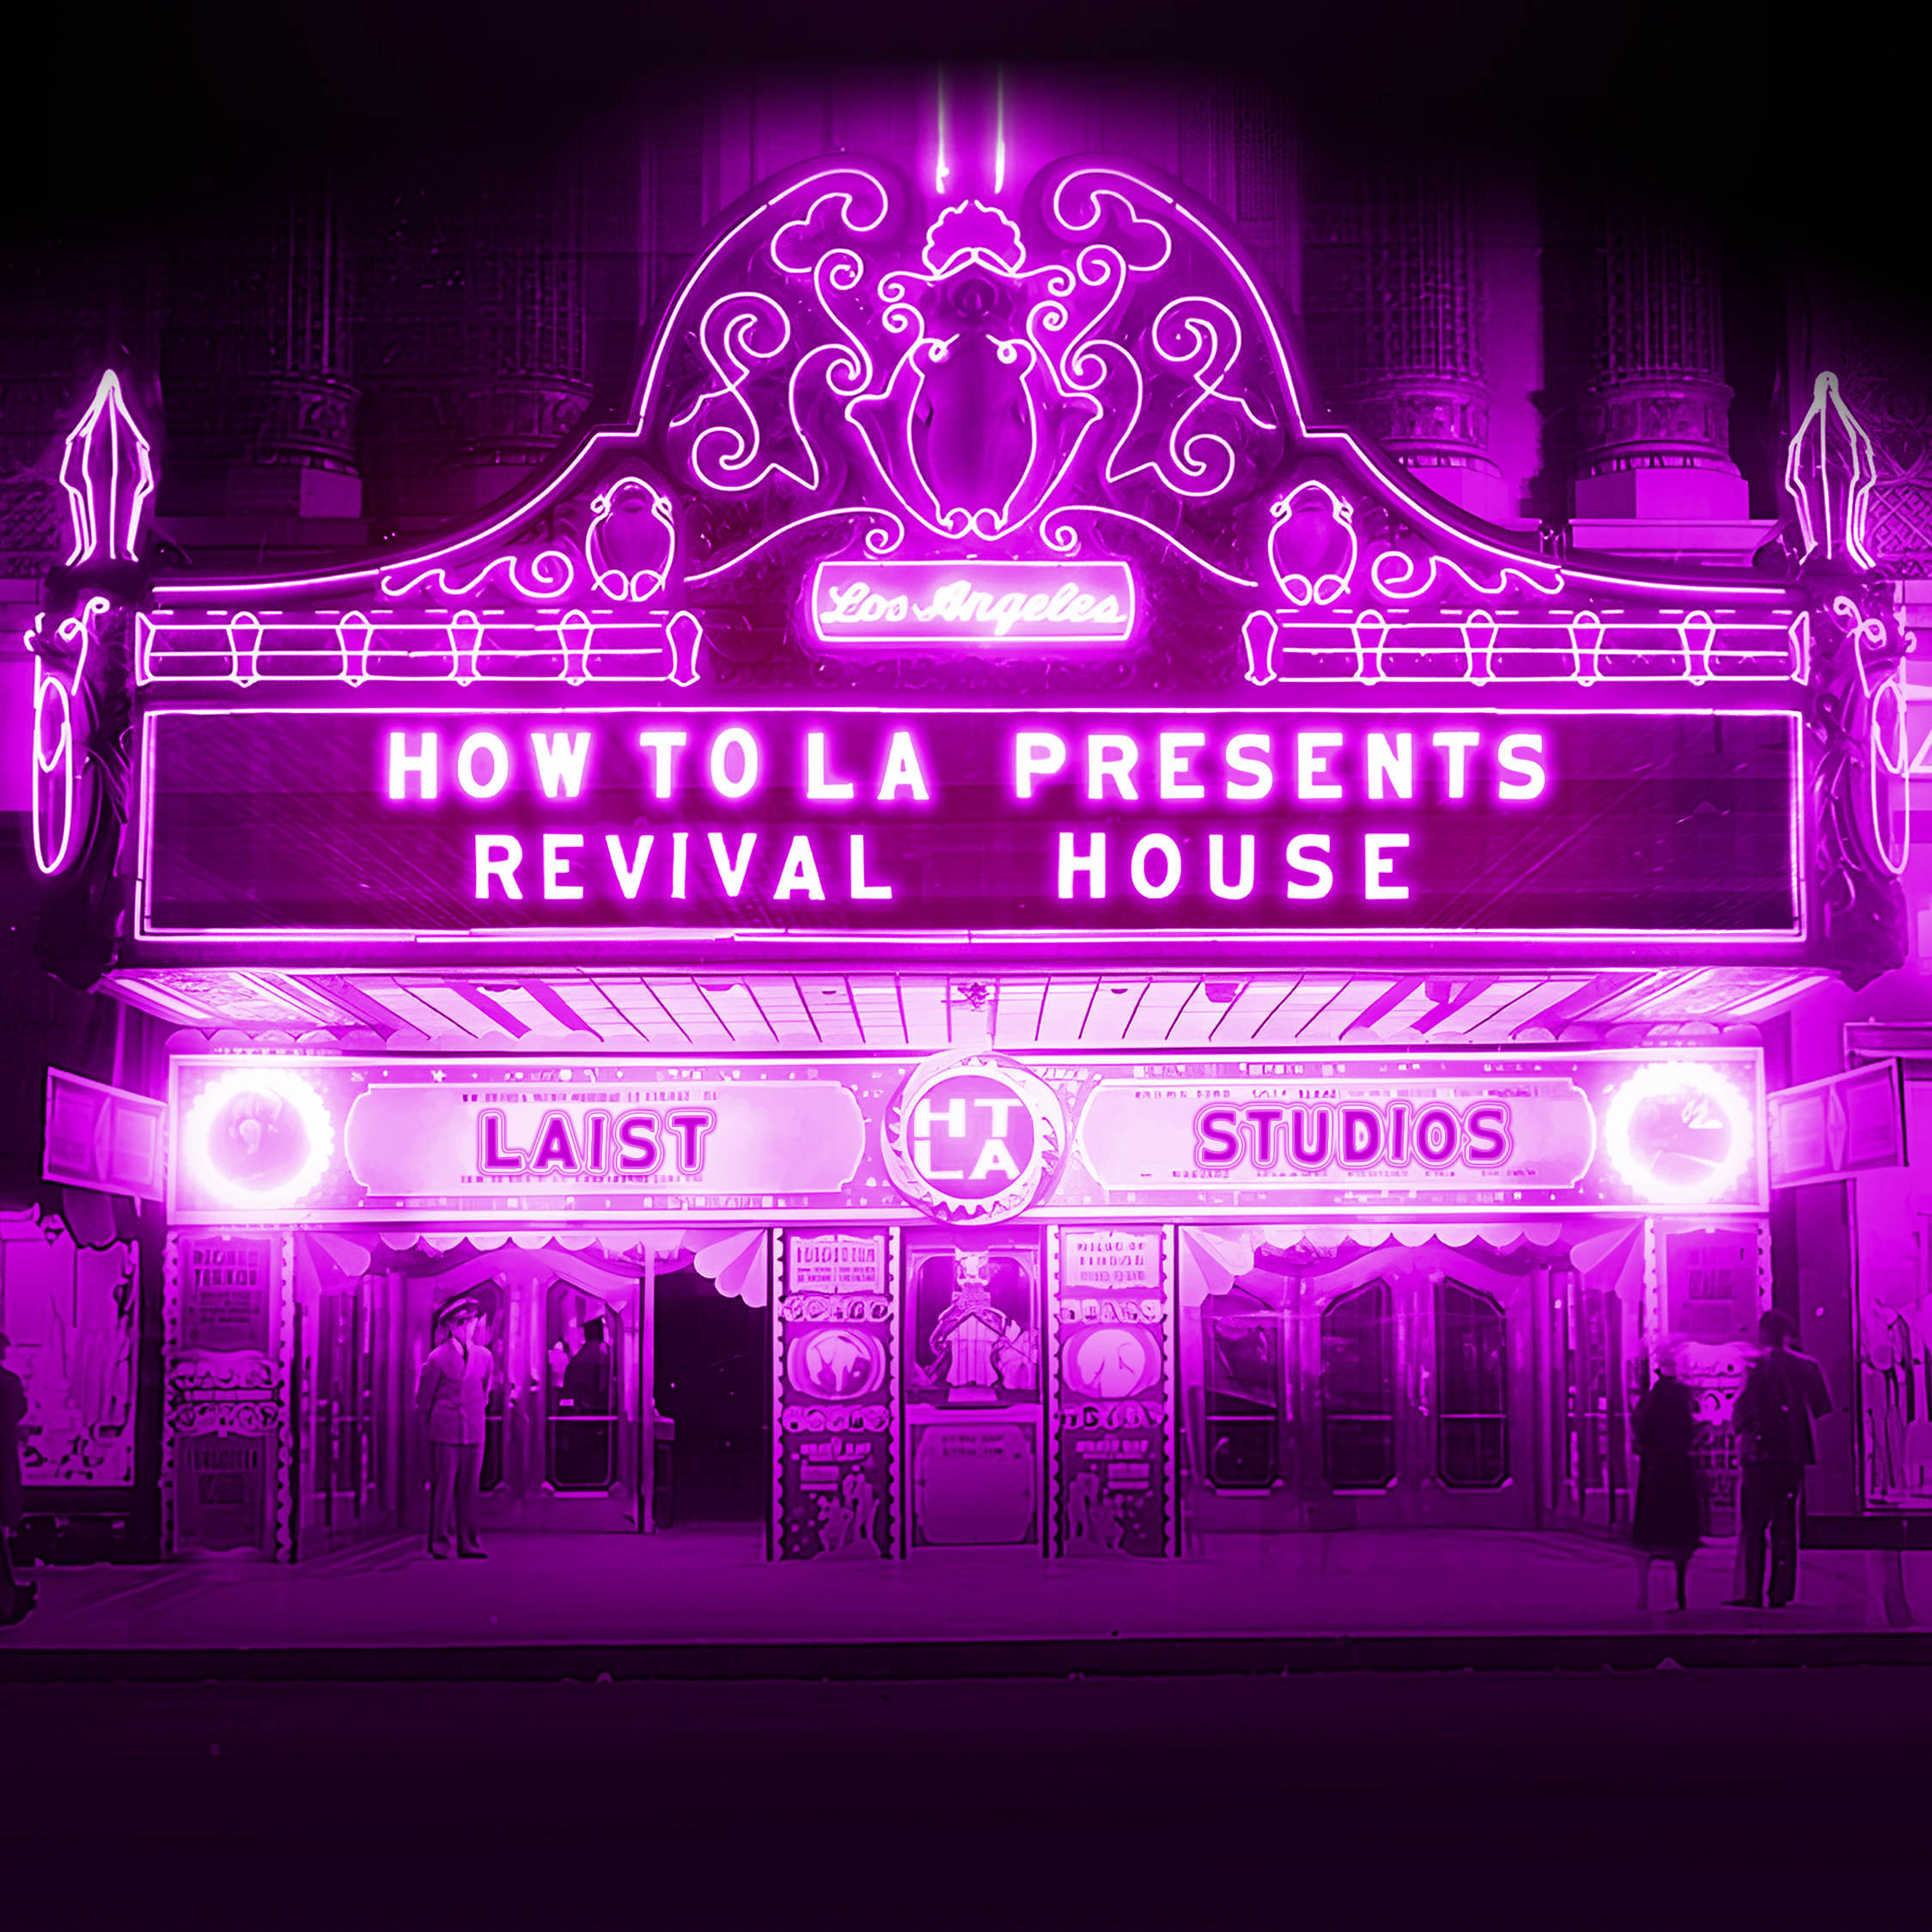 Revival House: The Egyptian Theater (REDUX)